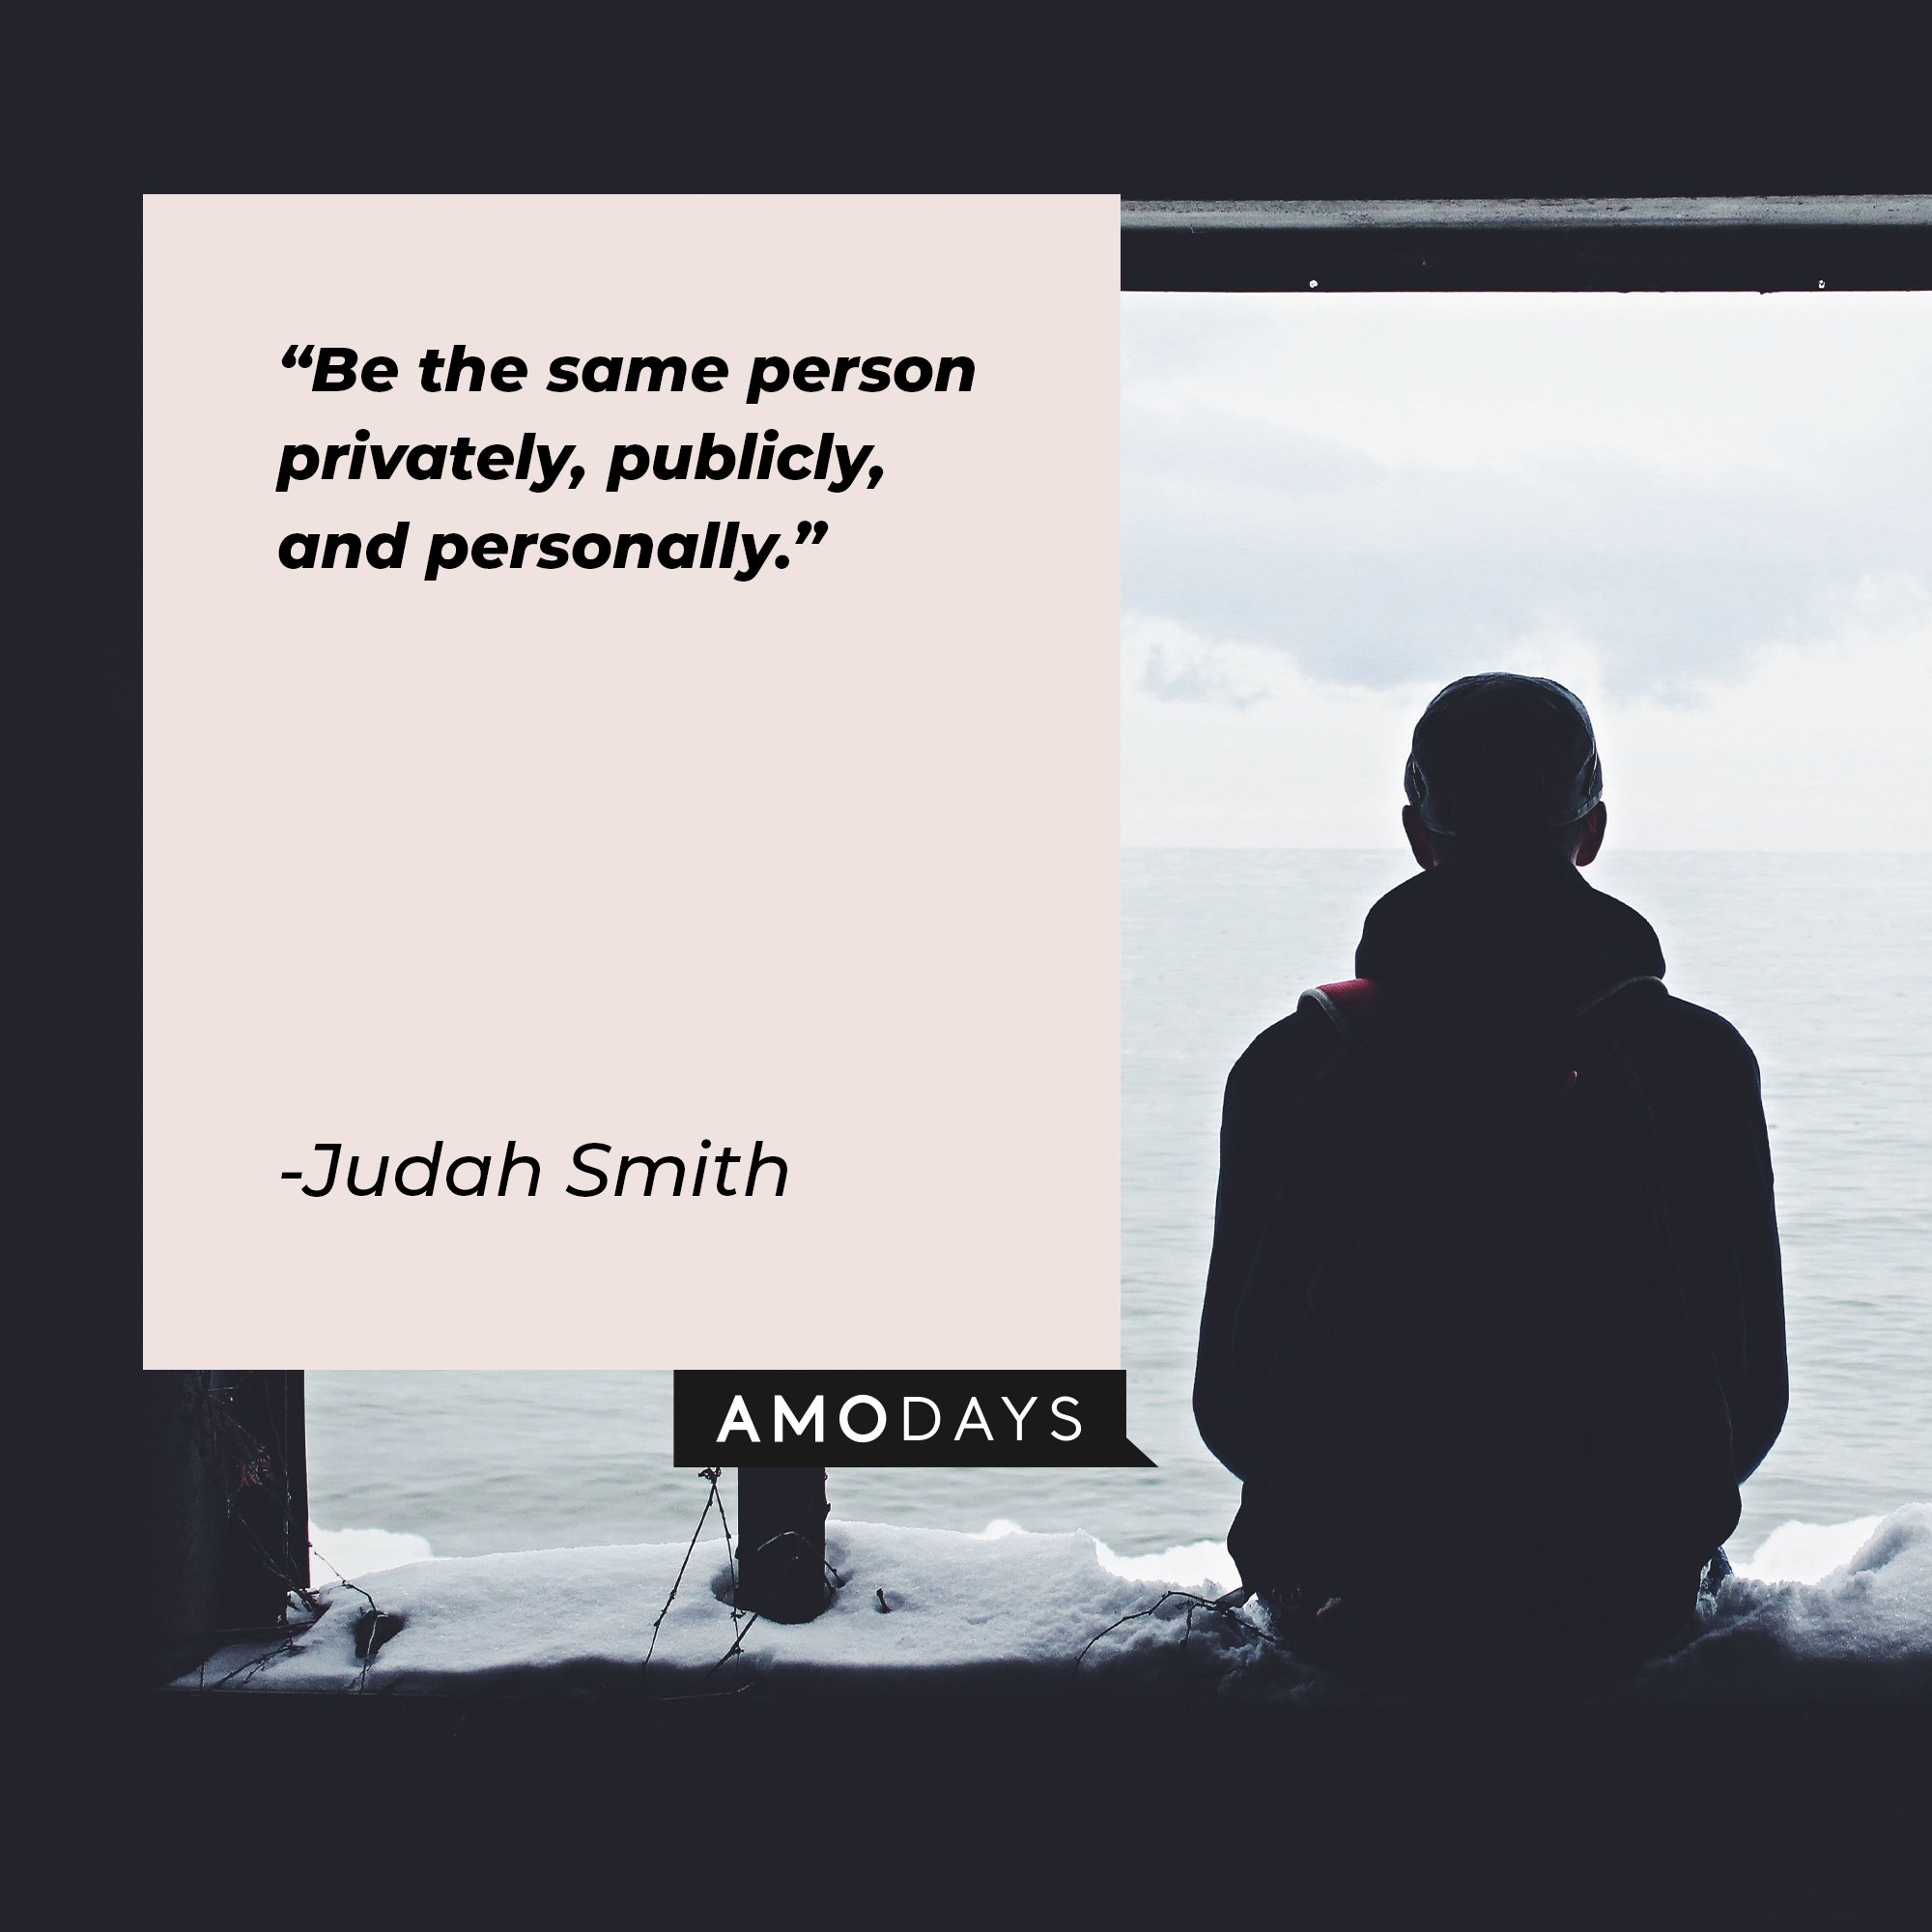  Judah Smith’s quote: "Be the same person privately, publicly, and personally." | Image: AmoDays